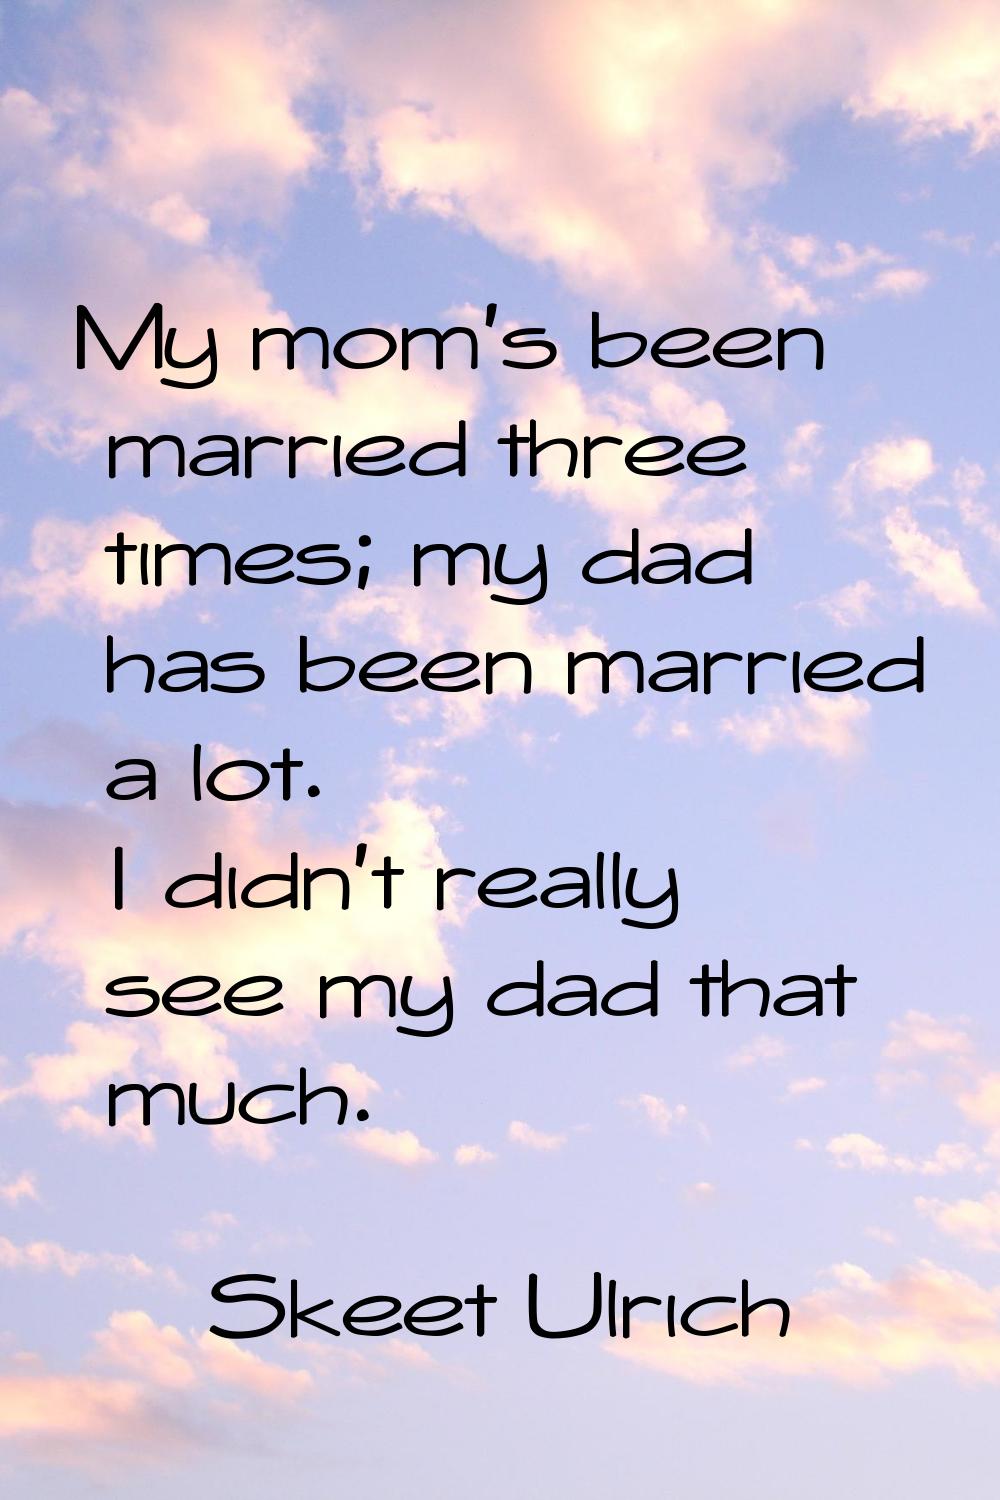 My mom's been married three times; my dad has been married a lot. I didn't really see my dad that m